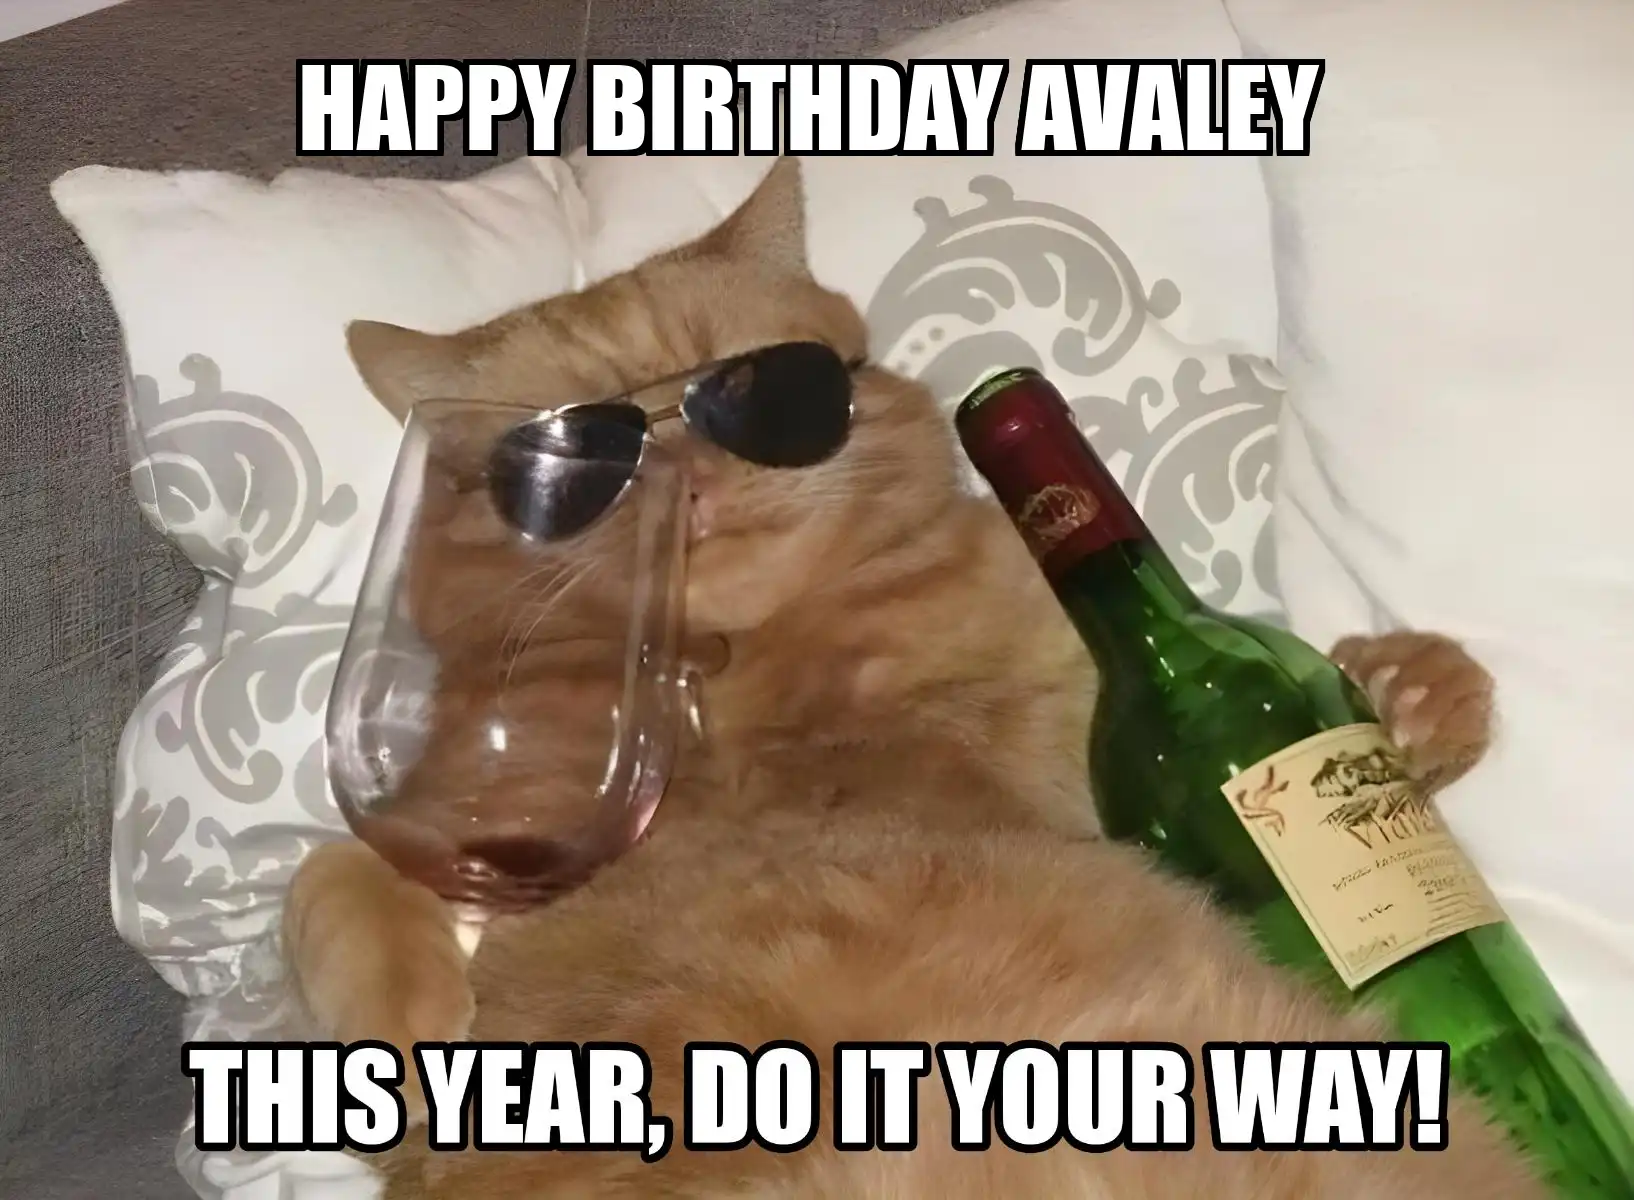 Happy Birthday Avaley This Year Do It Your Way Meme